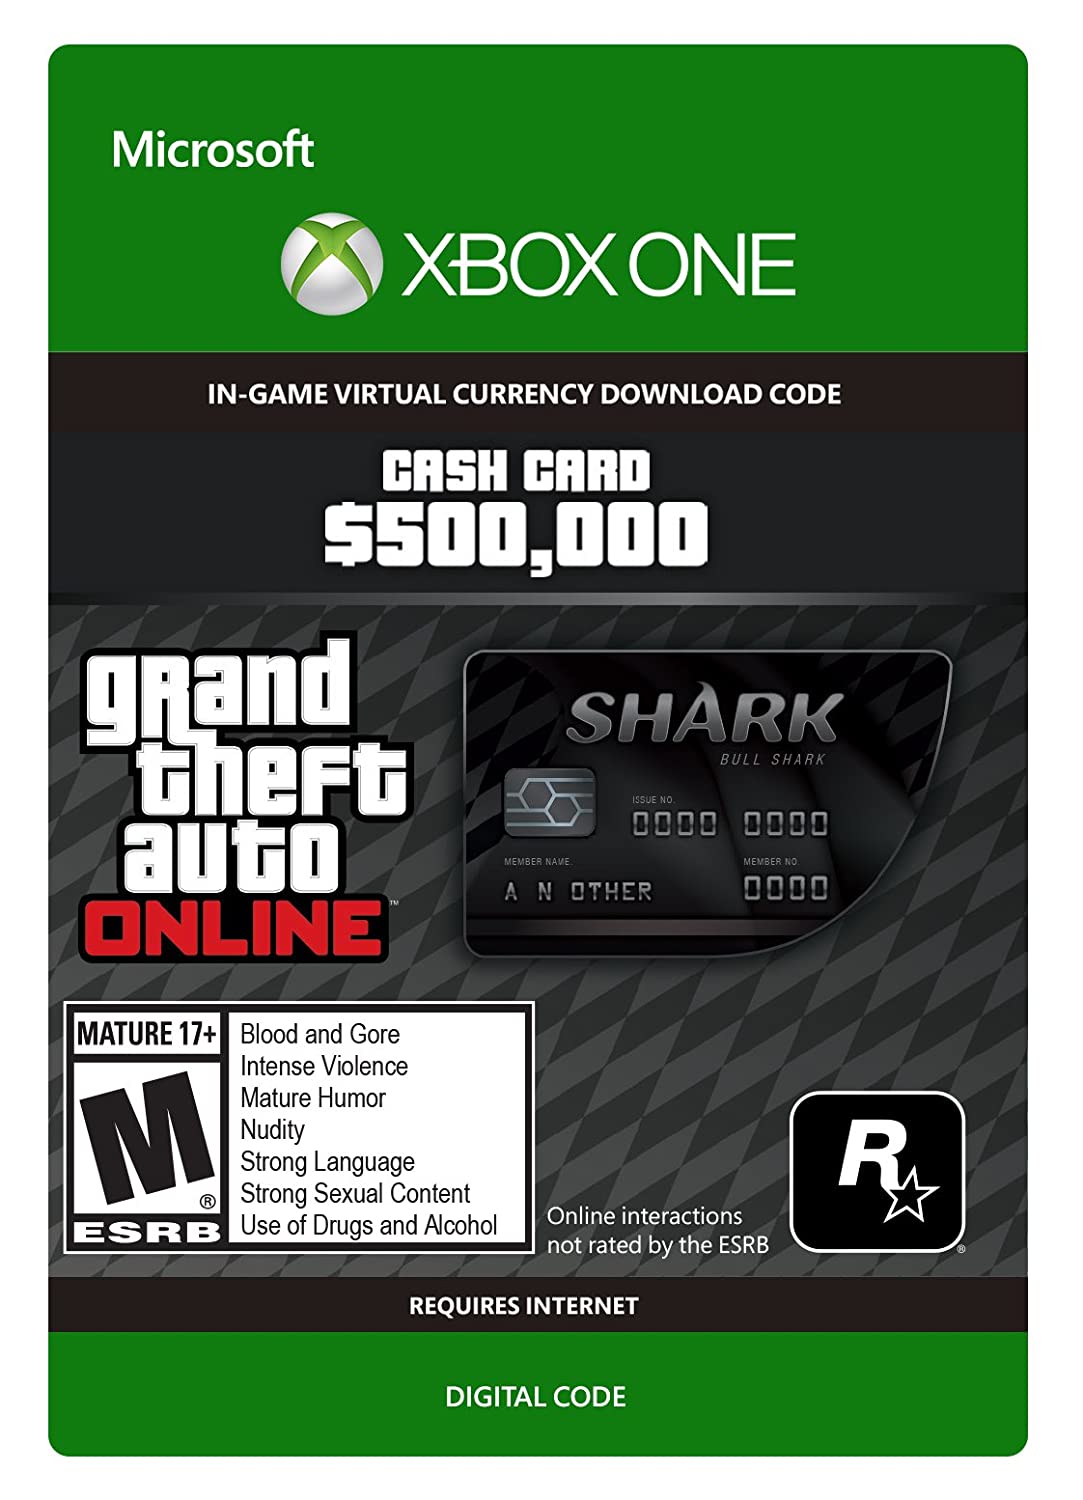 Grand Theft Auto V : Bull Shark Cash Card $500,000 In-Game